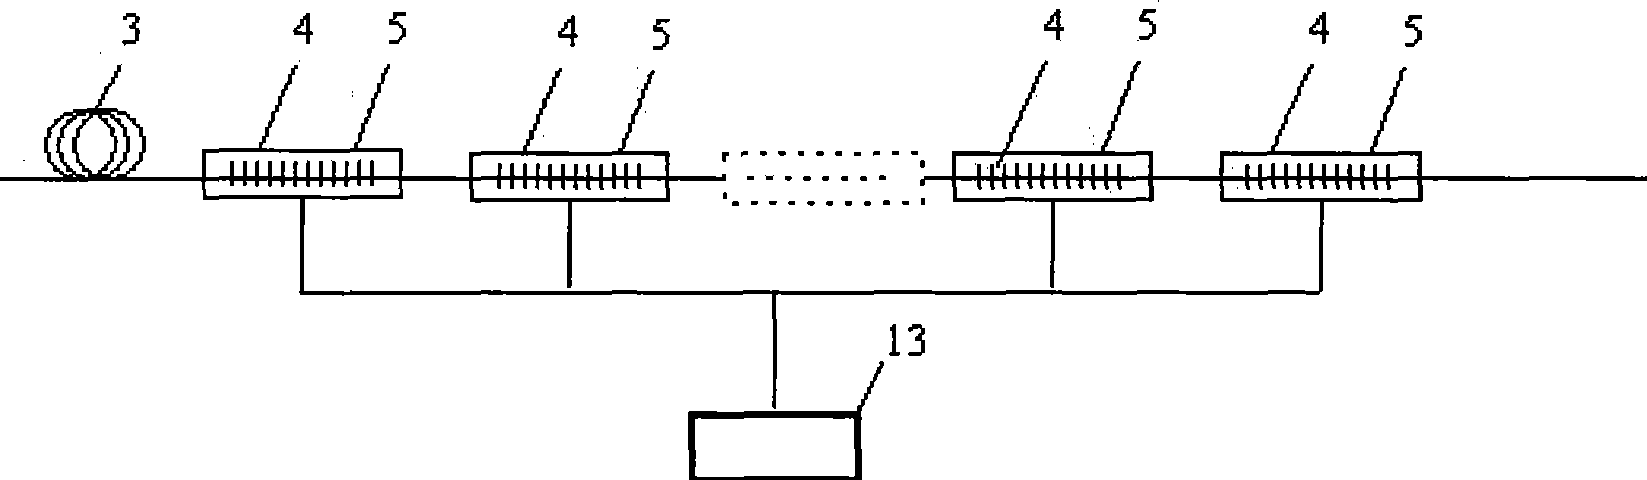 System for measuring gas concentration of optical fiber grating with tunable filtering characteristic